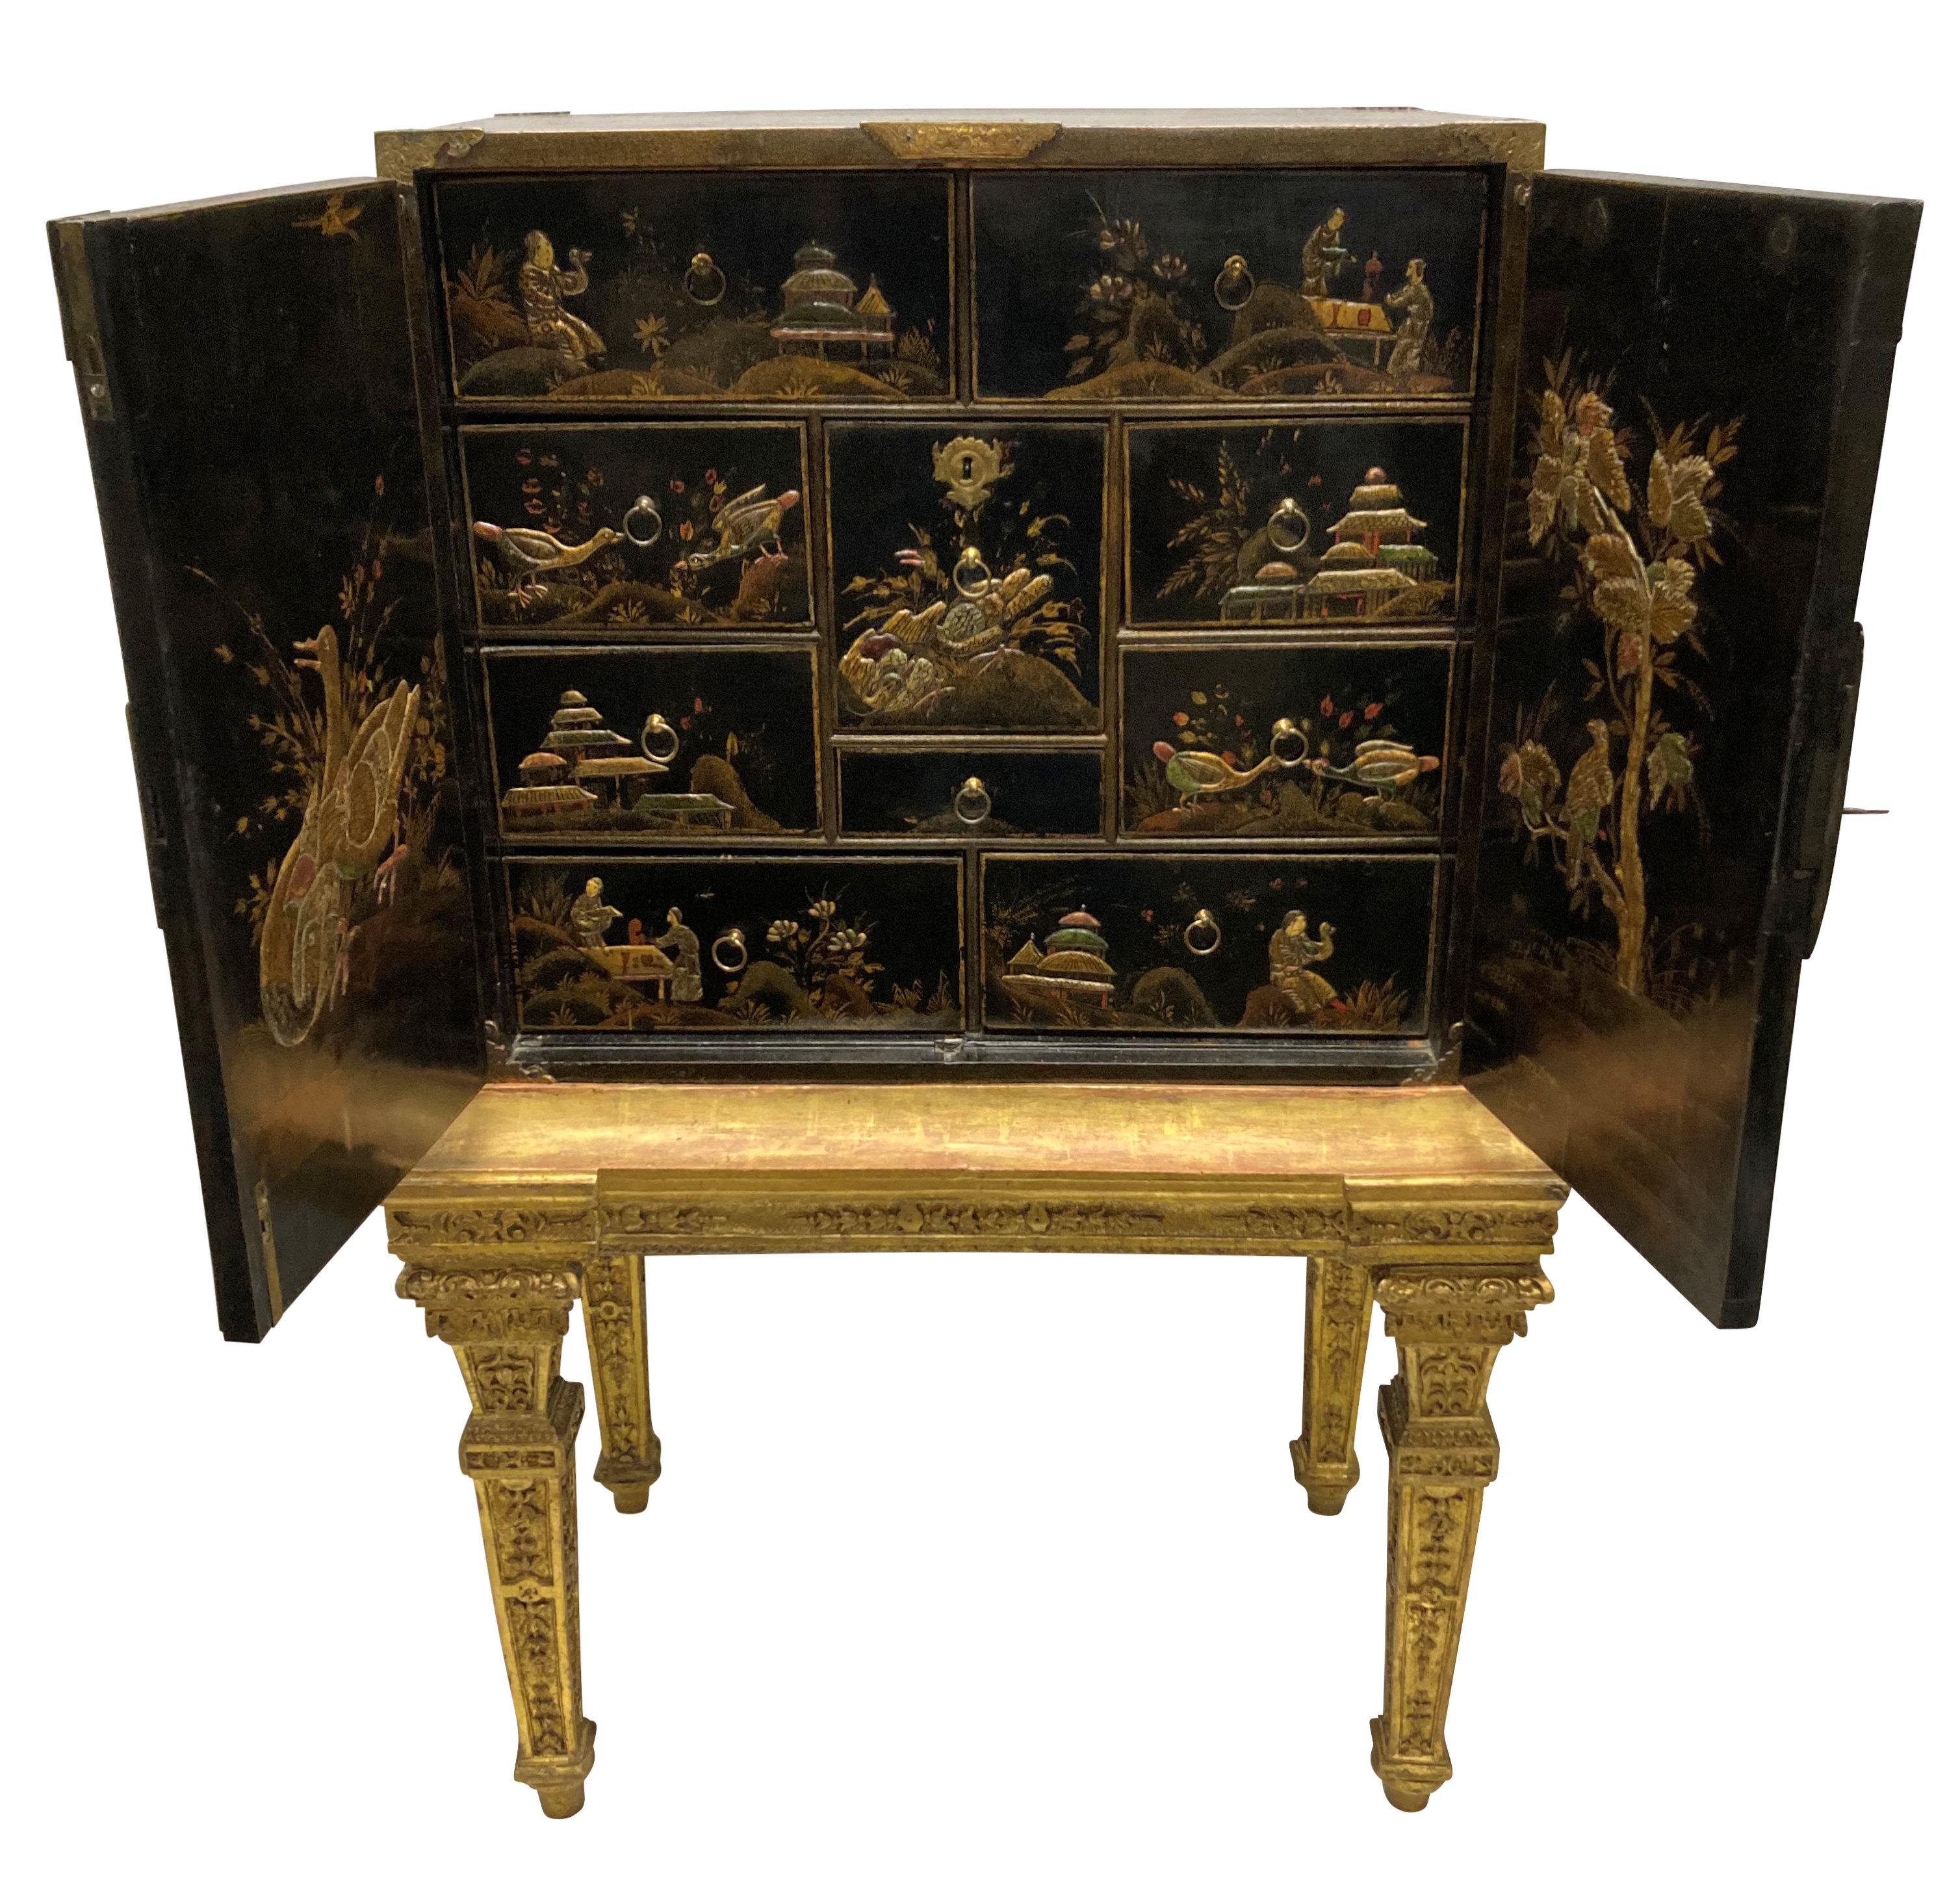 William and Mary Fine William & Mary Chinoiserie Cabinet on Stand